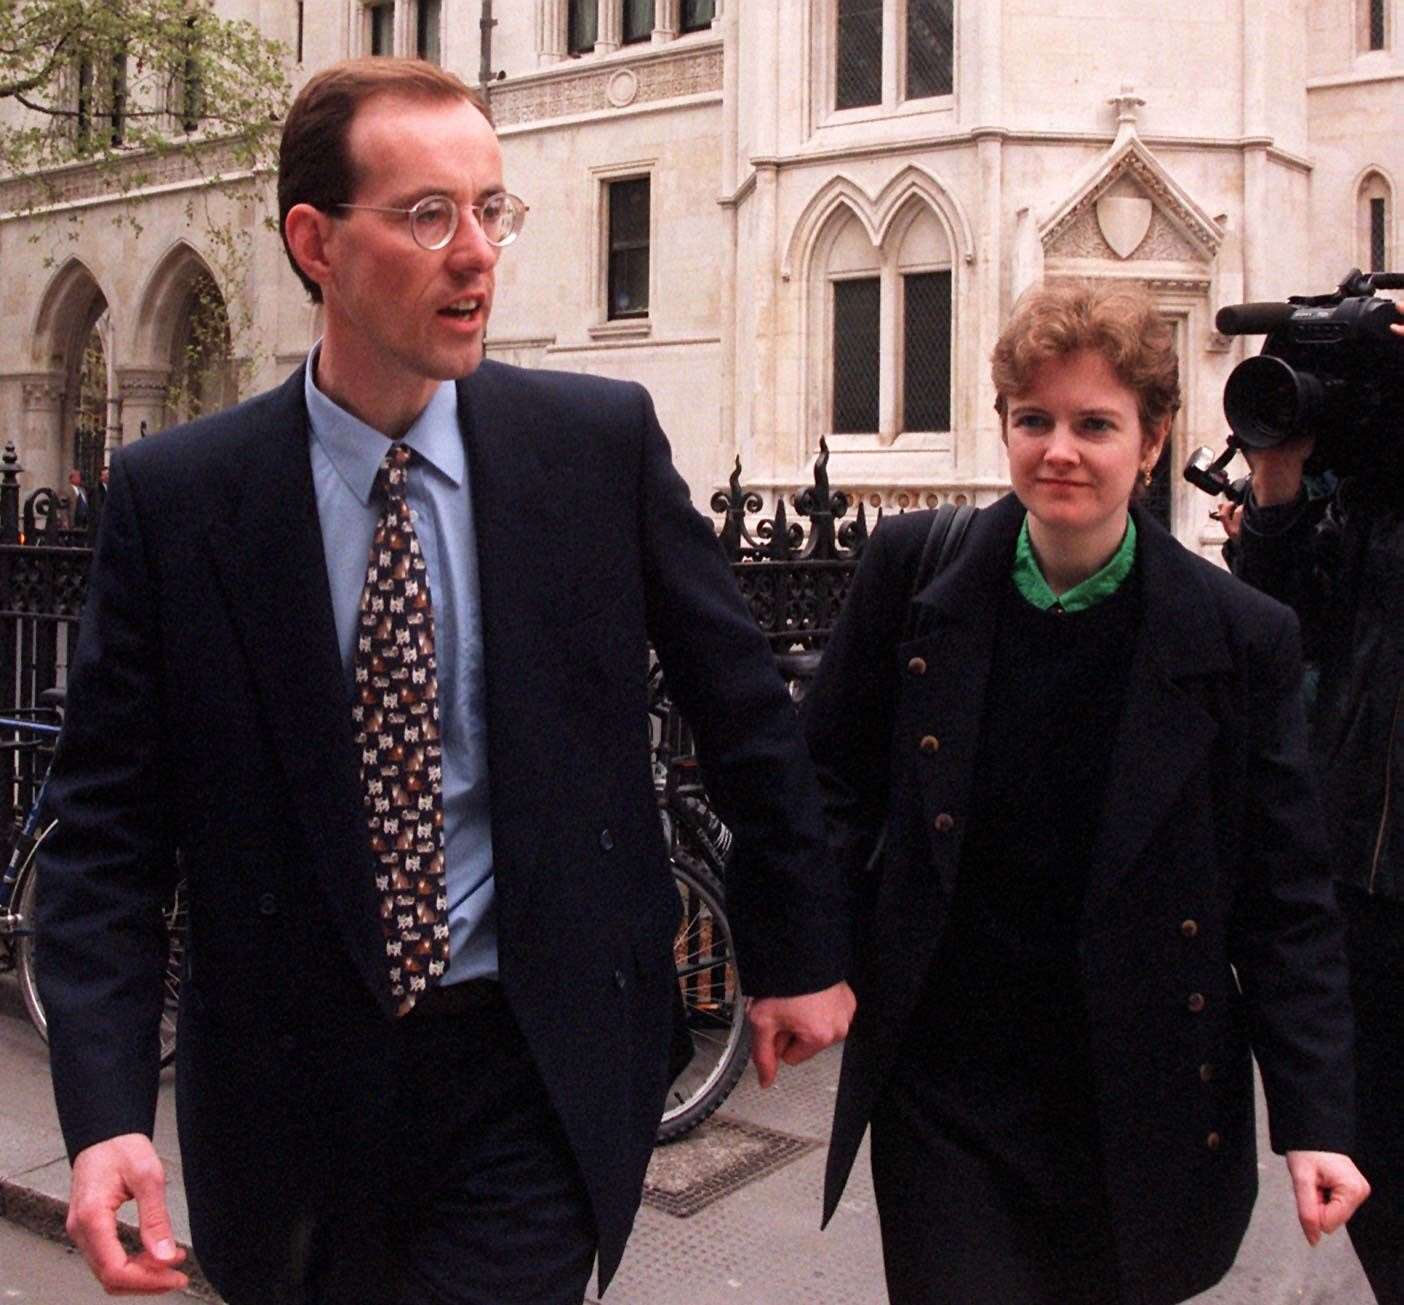 Jonathan Jones and his girlfriend Cheryl Tooze arrive at the High Court in London to hear the appeal court judges, who quashed his conviction for the murder of Ms Tooze’s parents and freed him on April 25 1996, make public their reasons for doing so. Mr Jones reiterated his belief that the police should reopen the case and follow up leads highlighted in the judges’ report (PA)